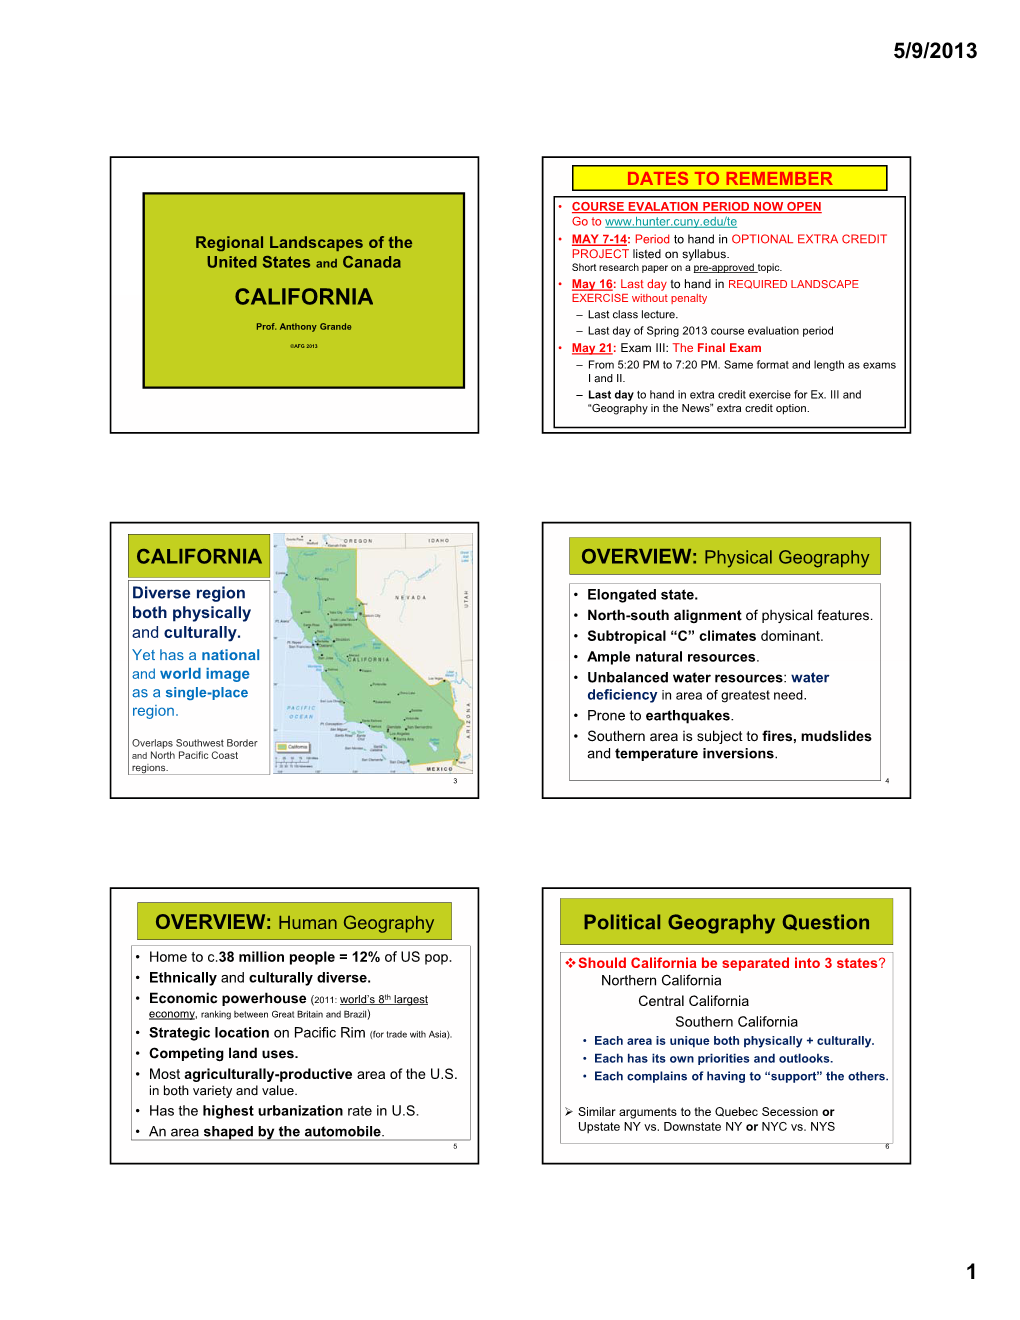 CALIFORNIA EXERCISE with out Penalty Lt – Last Class Lecture